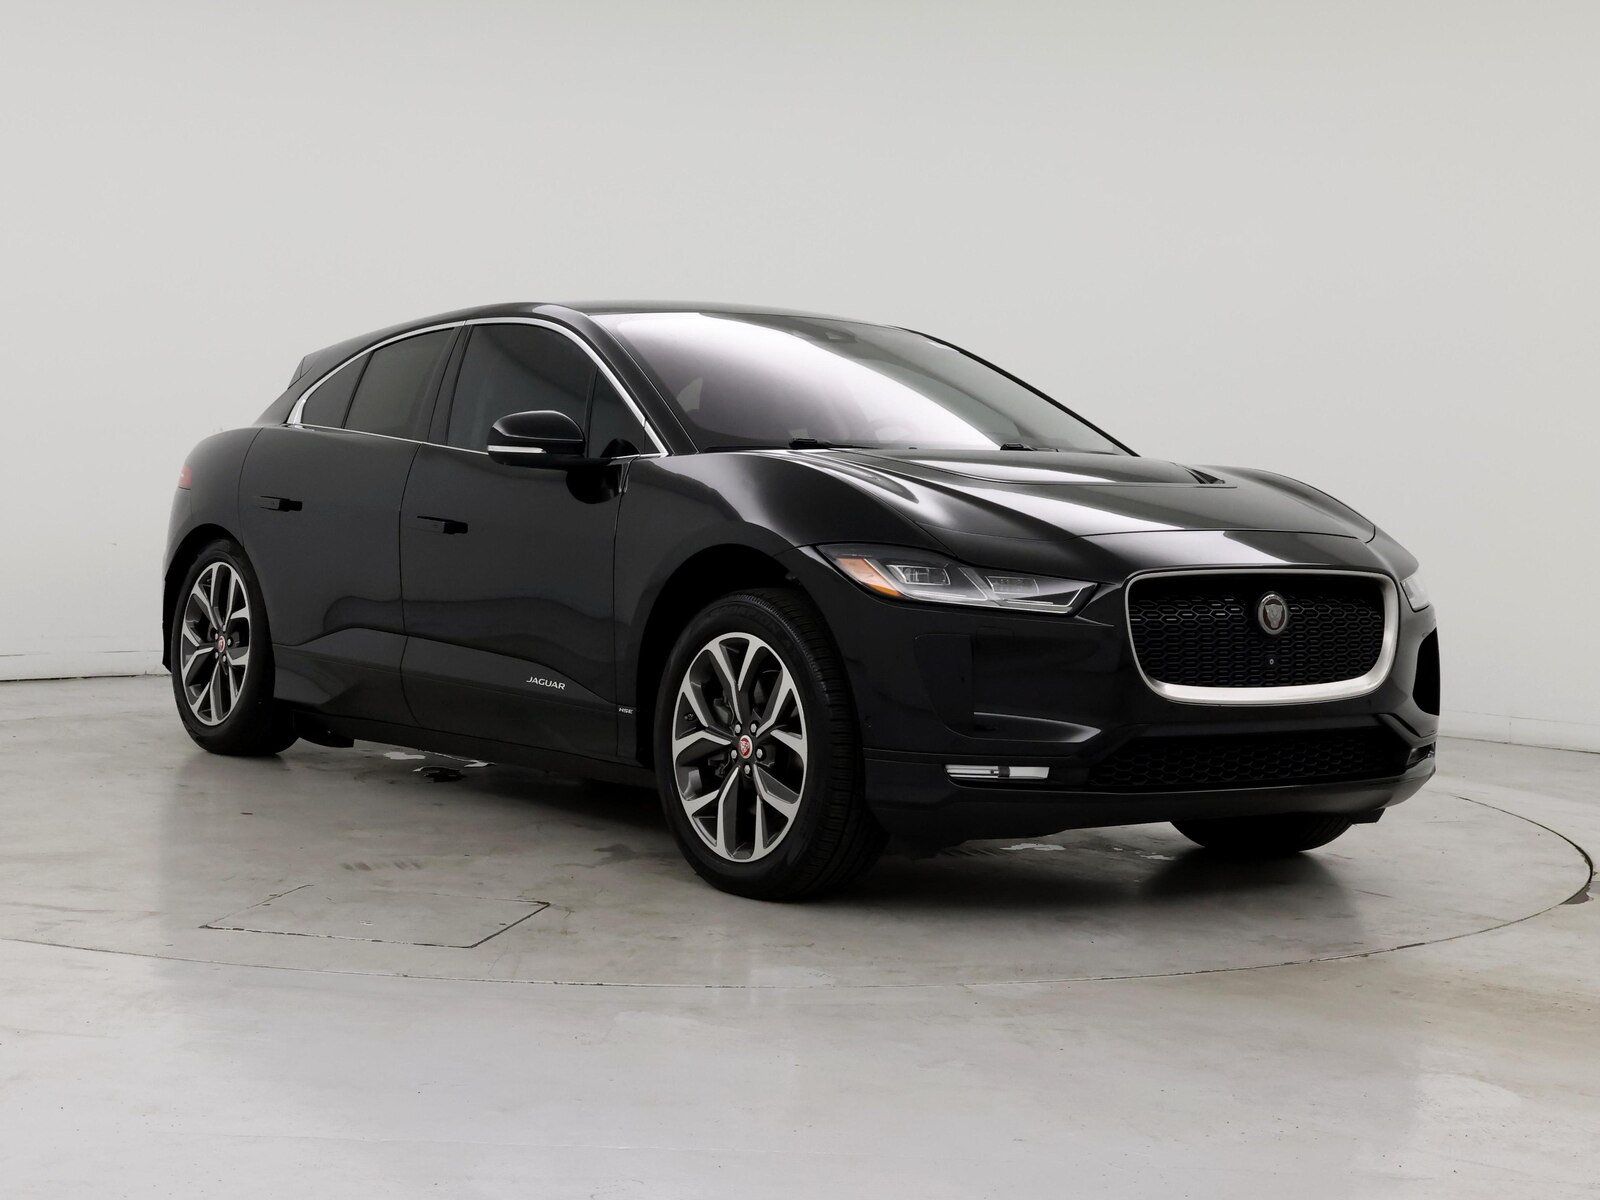 Used 2019 Jaguar I-PACE First Edition with VIN SADHD2S12K1F67923 for sale in Kenosha, WI